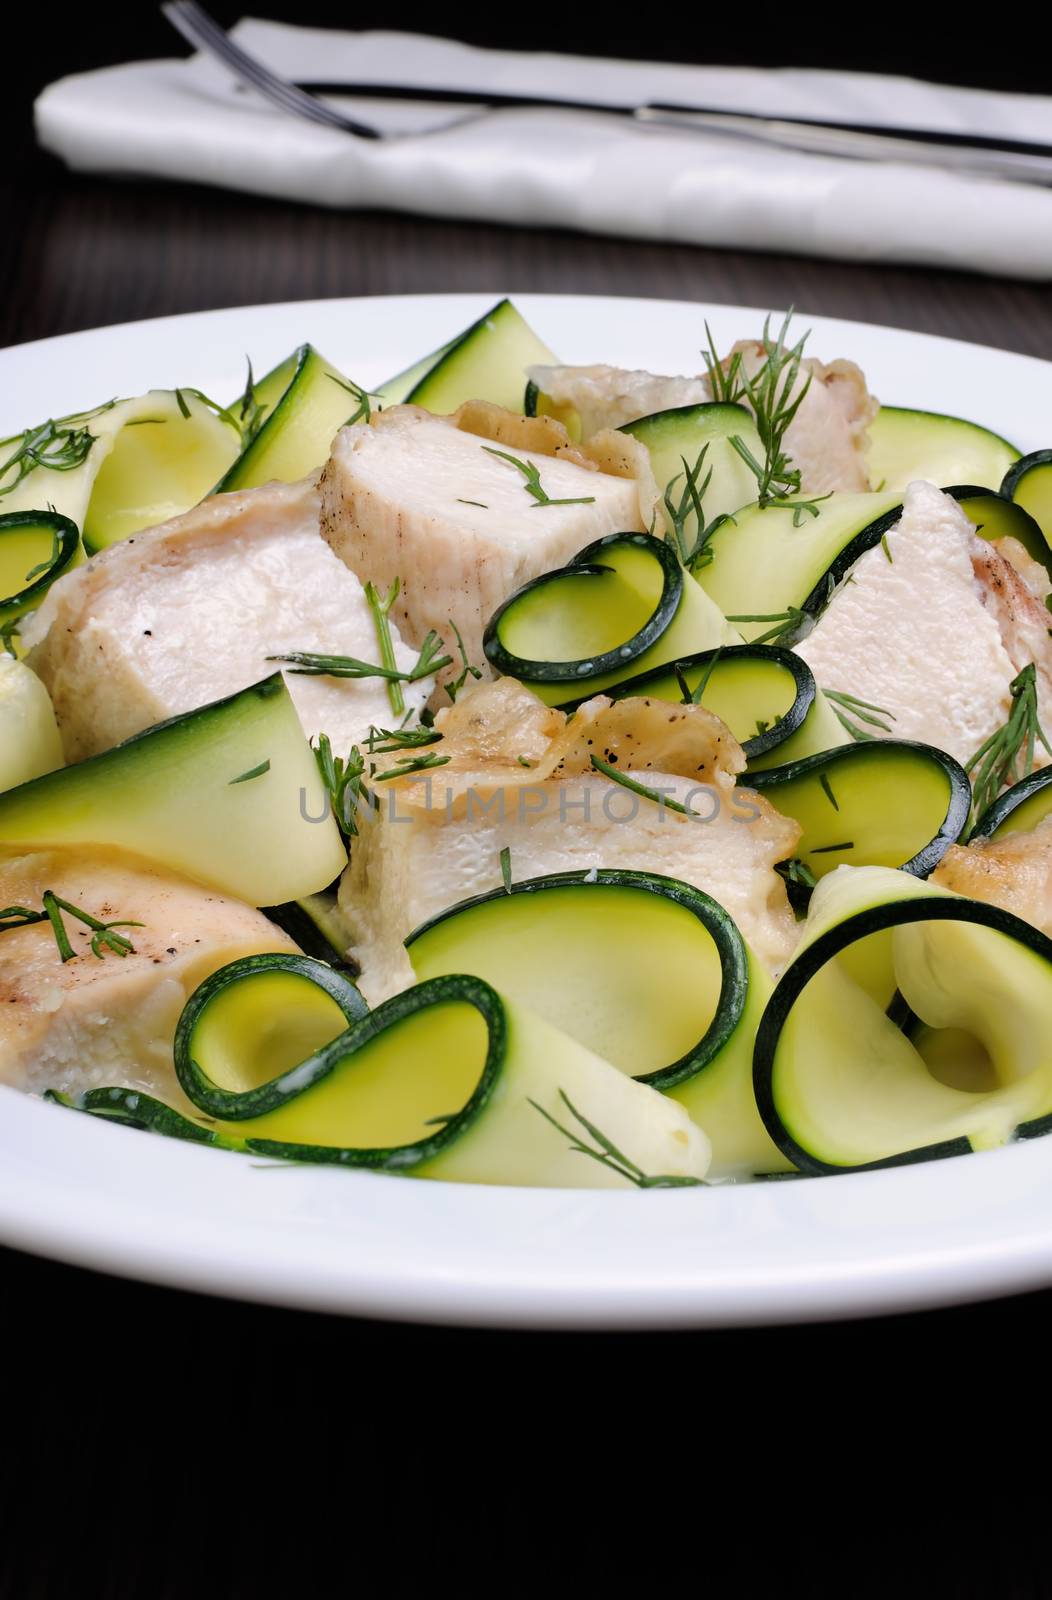 zucchini with slices of chicken by Apolonia